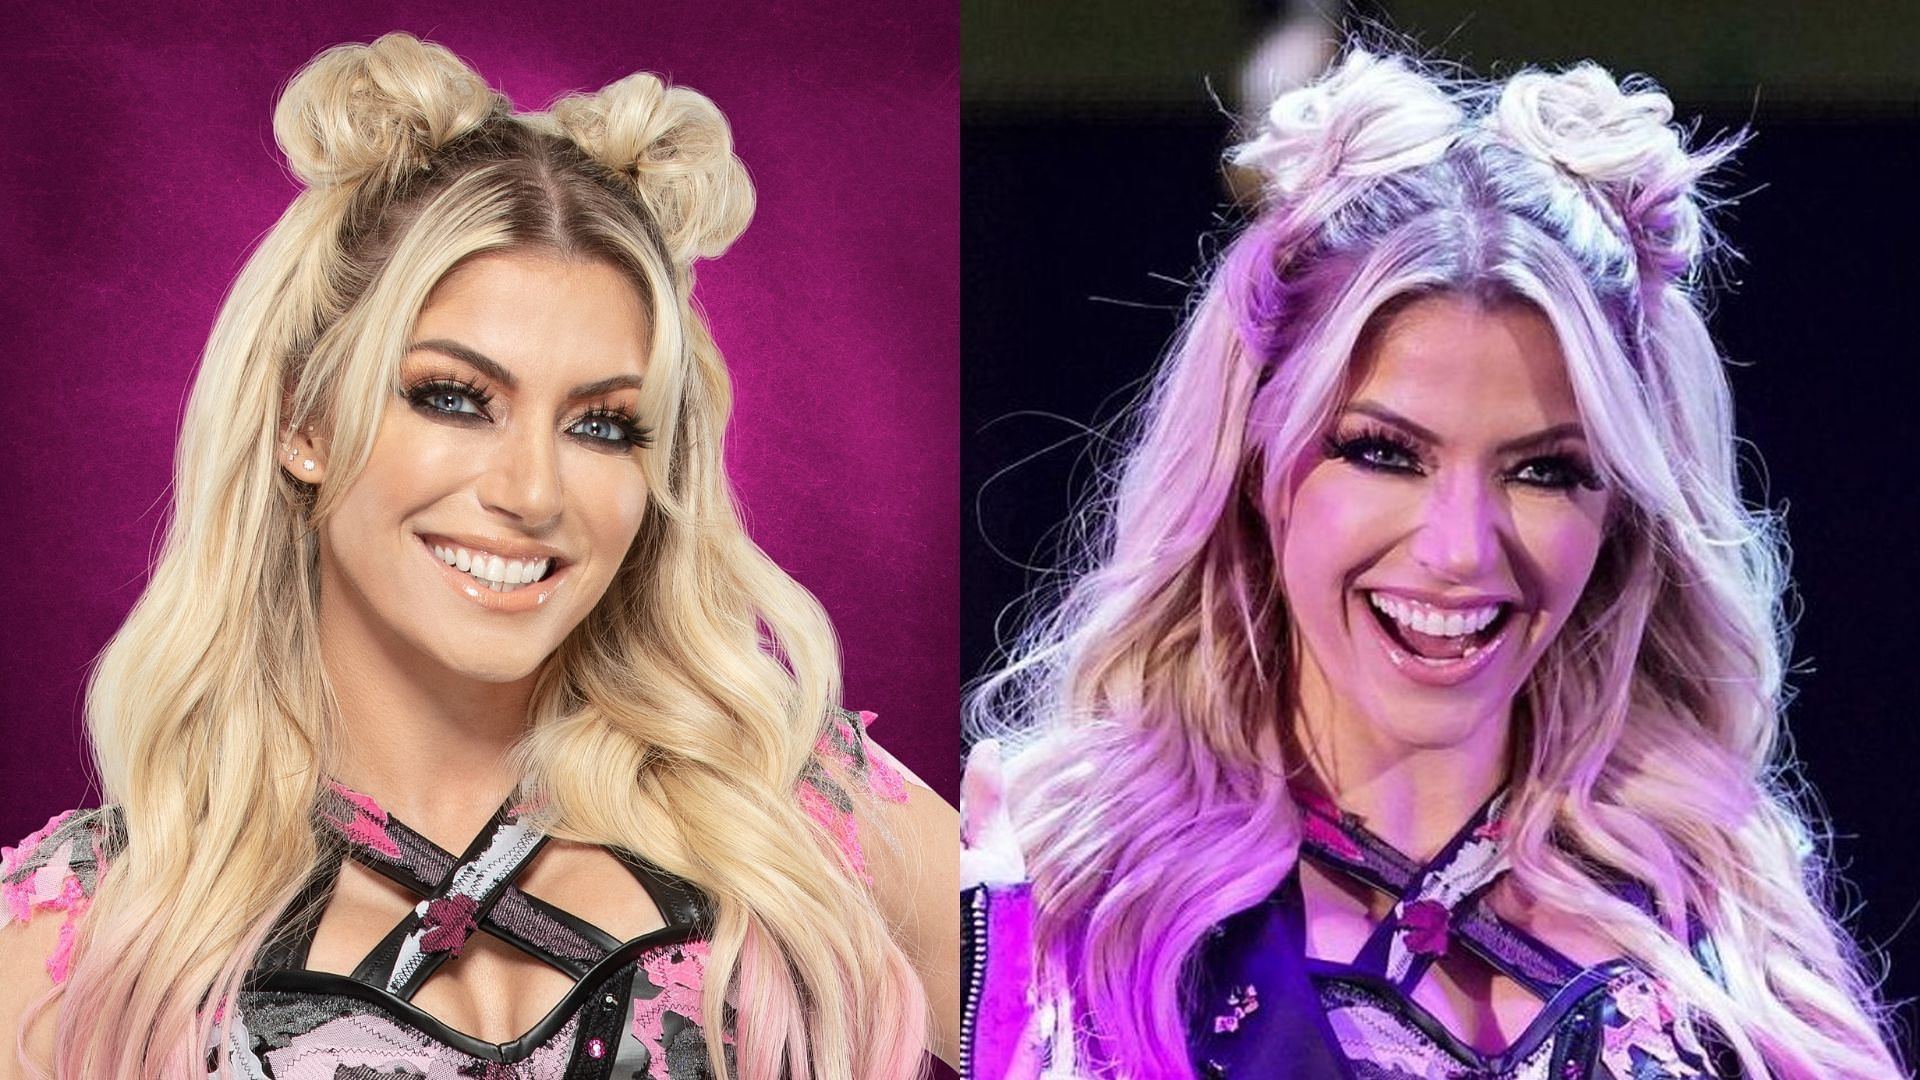 Alexa Bliss is currently on hiatus from the company.